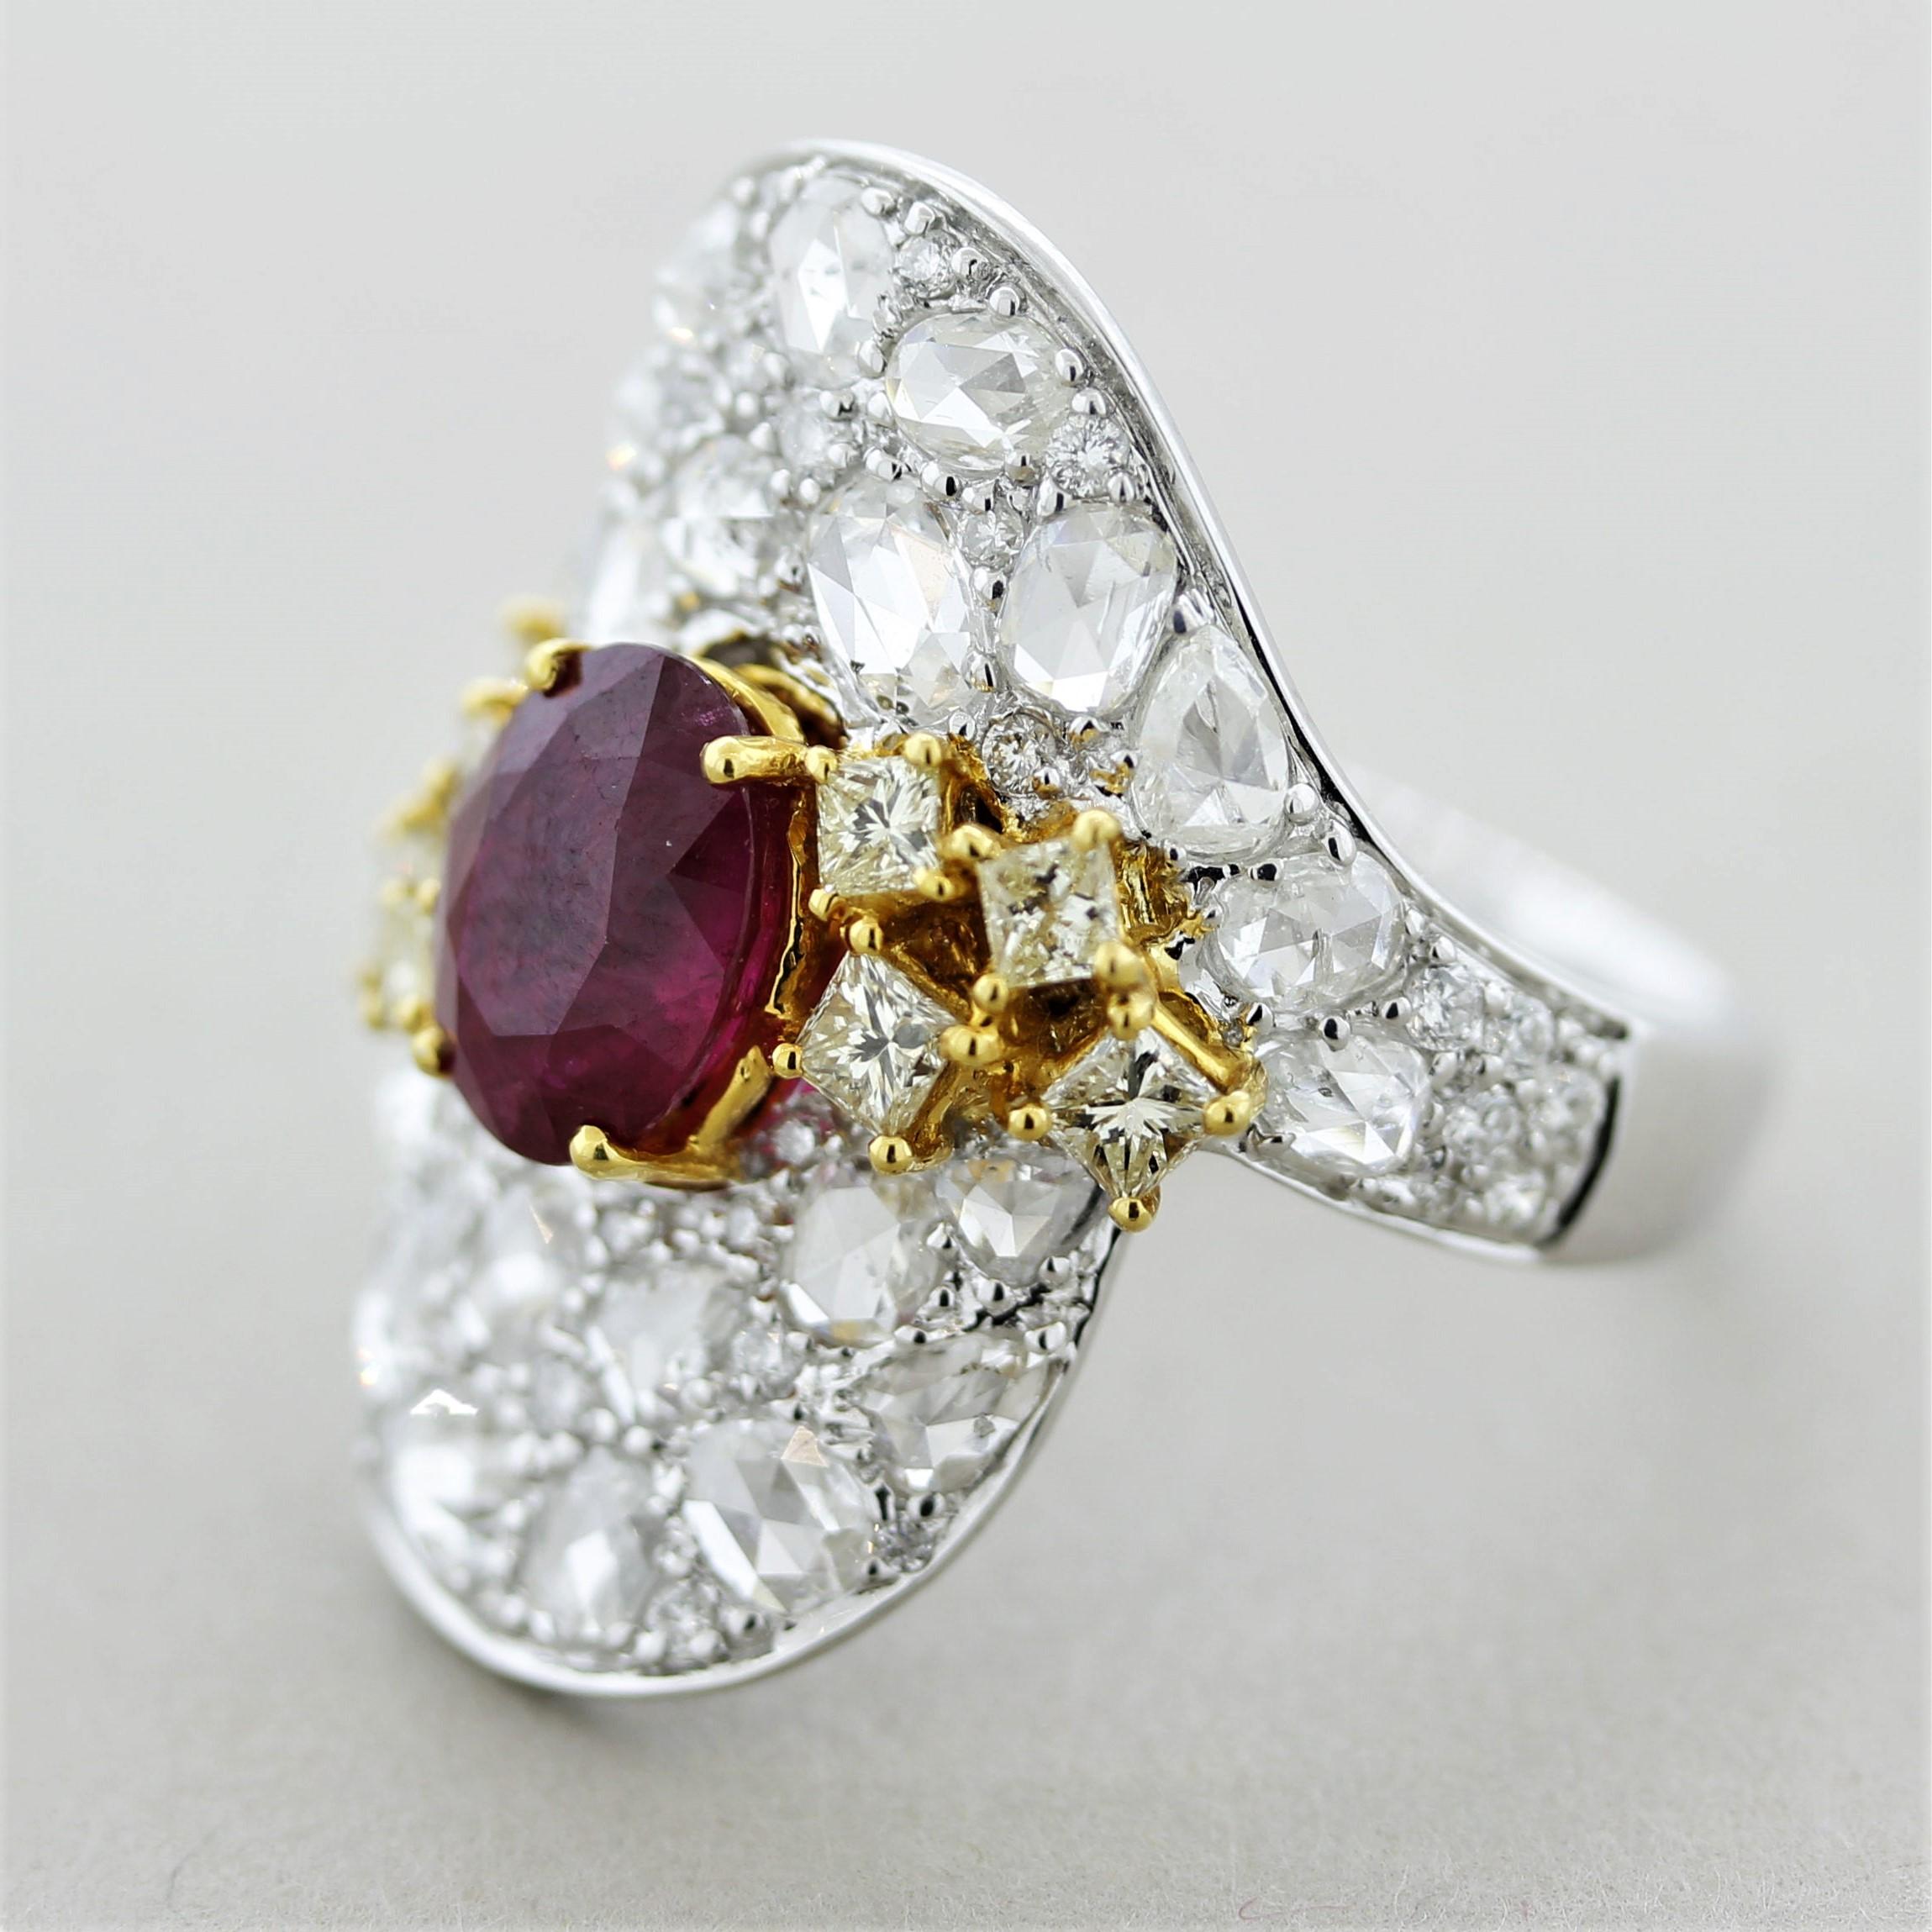 A unique and stylish ring featuring a fine oval shaped ruby and fancy shaped diamonds. The ruby has a fine intense red color with a pleasing oval shape and weighs 2.54 carats. It is accented by 3.10 carats of diamonds which include rose-cuts and